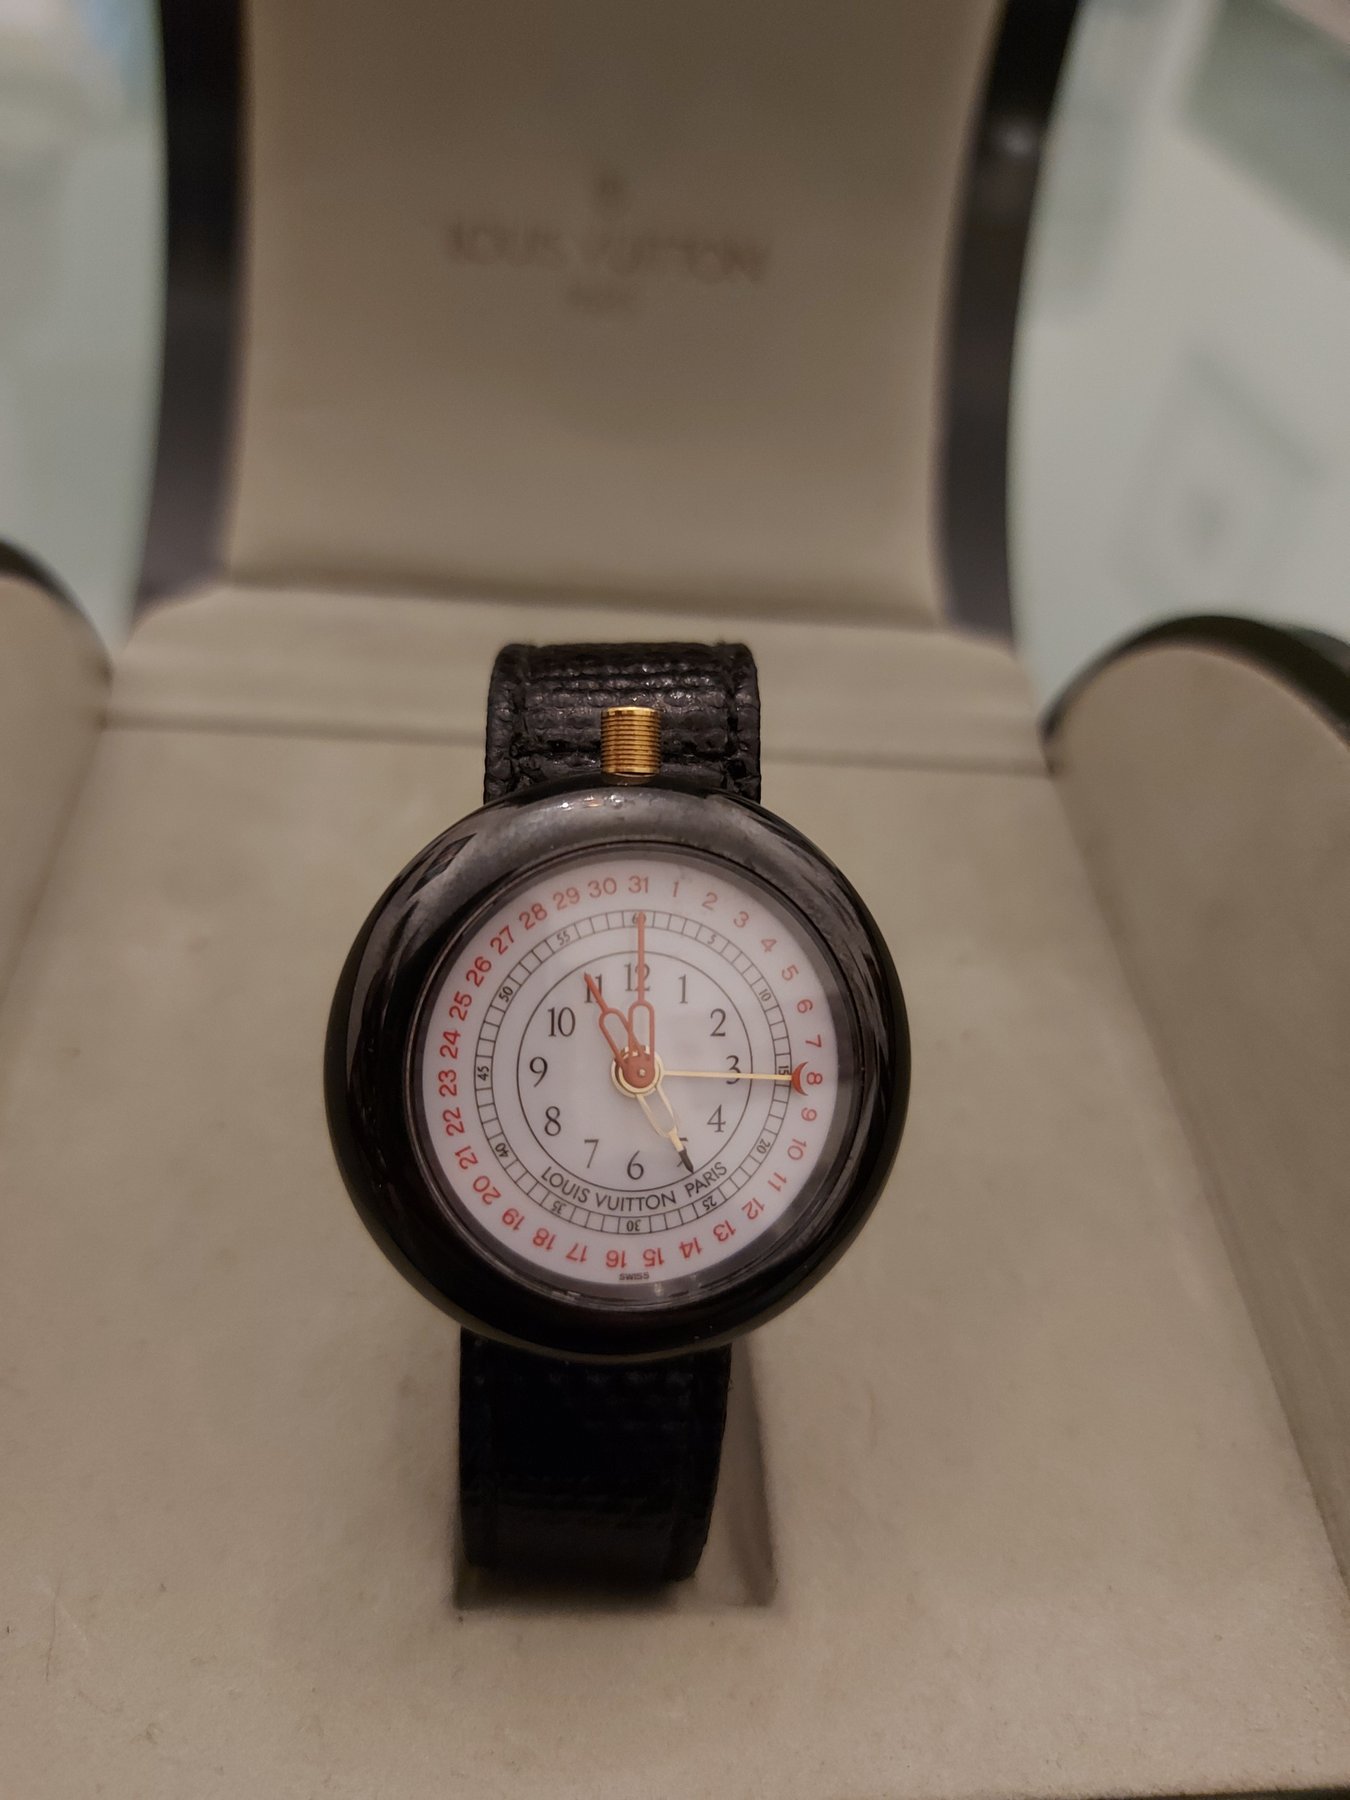 Hype watch or icon? Louis Vuitton Monterey II already sold but too